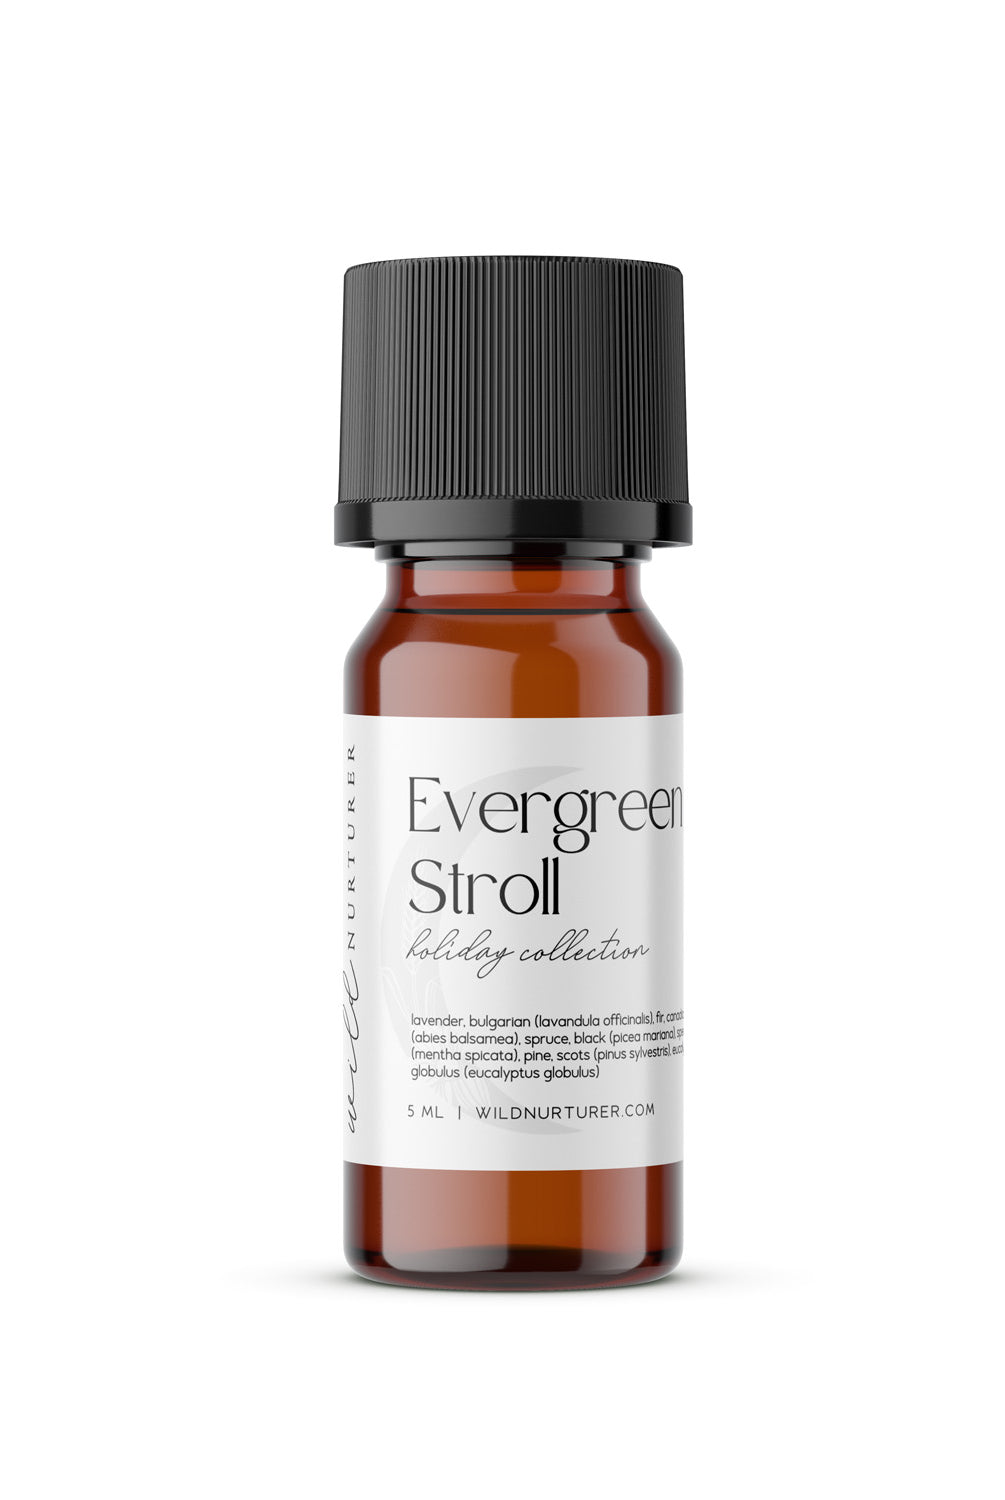 Three Evergreen Stroll - Winter Perfumery Diffuser Blend products from Wild Nurturer Aromatherapy, including a spray bottle and two small bottles, accompanied by pine cones and pine needles on a white background.